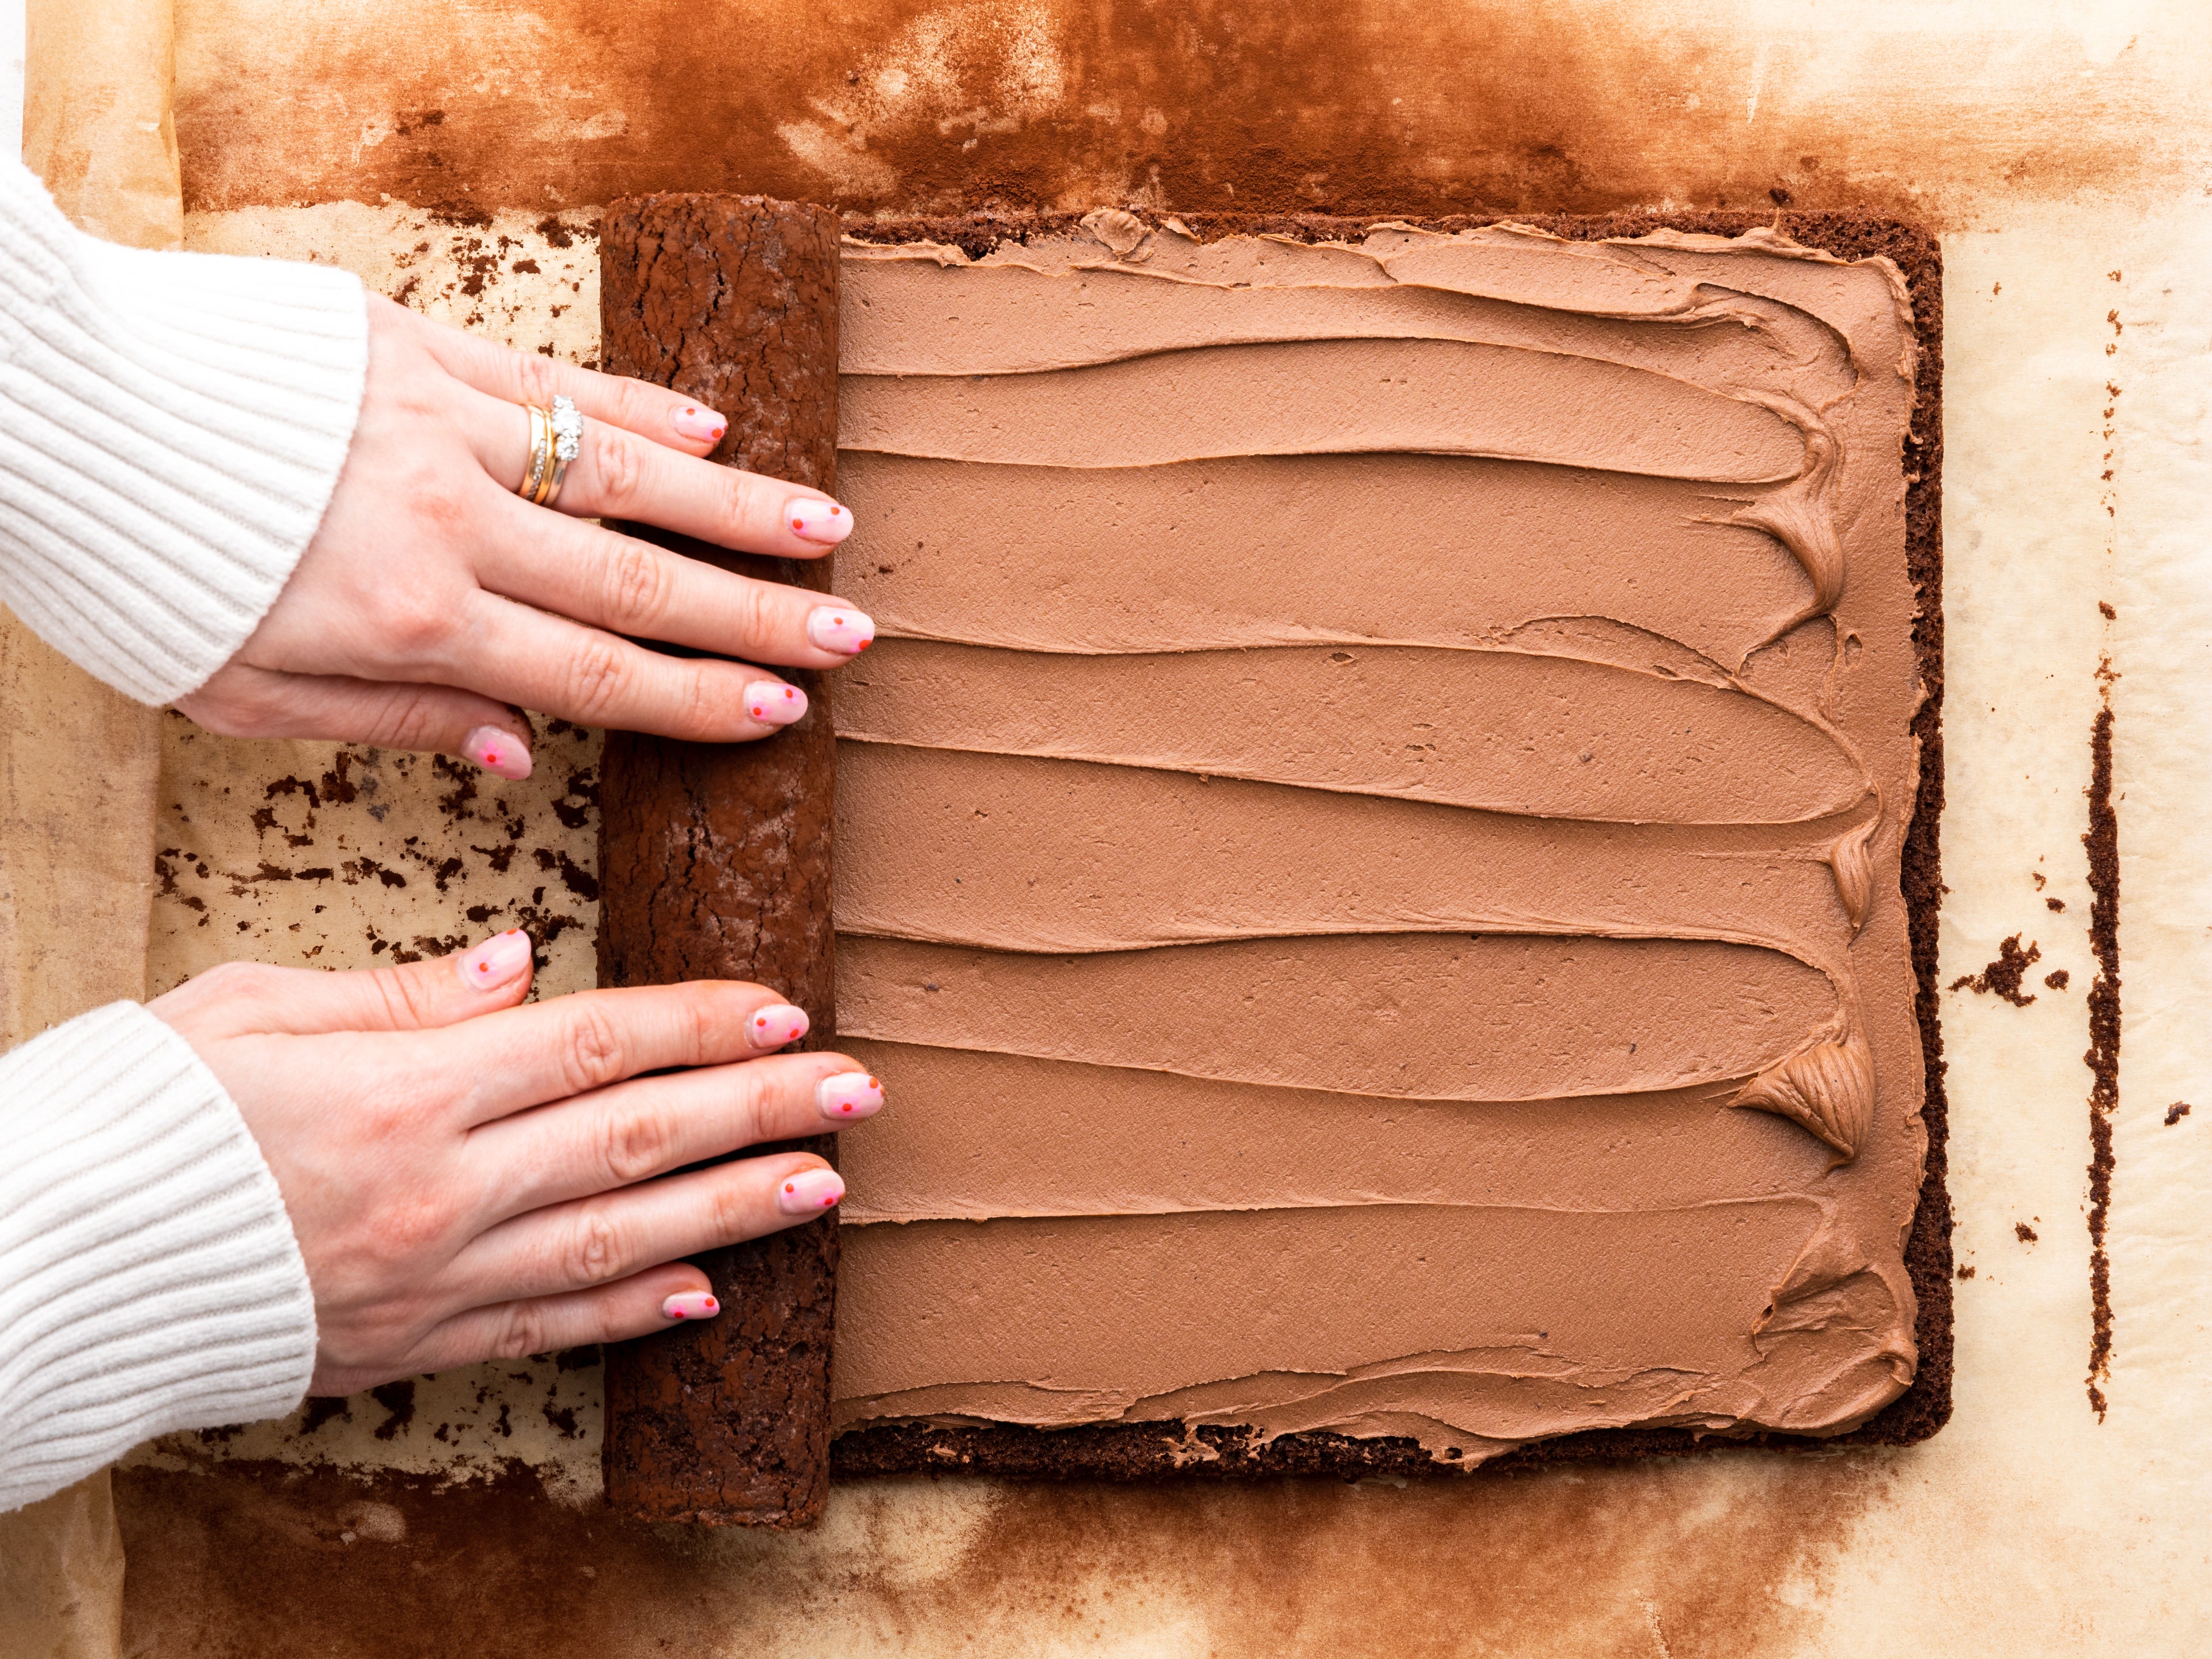 Hands rolling up a swiss roll covered in chocolate buttercream